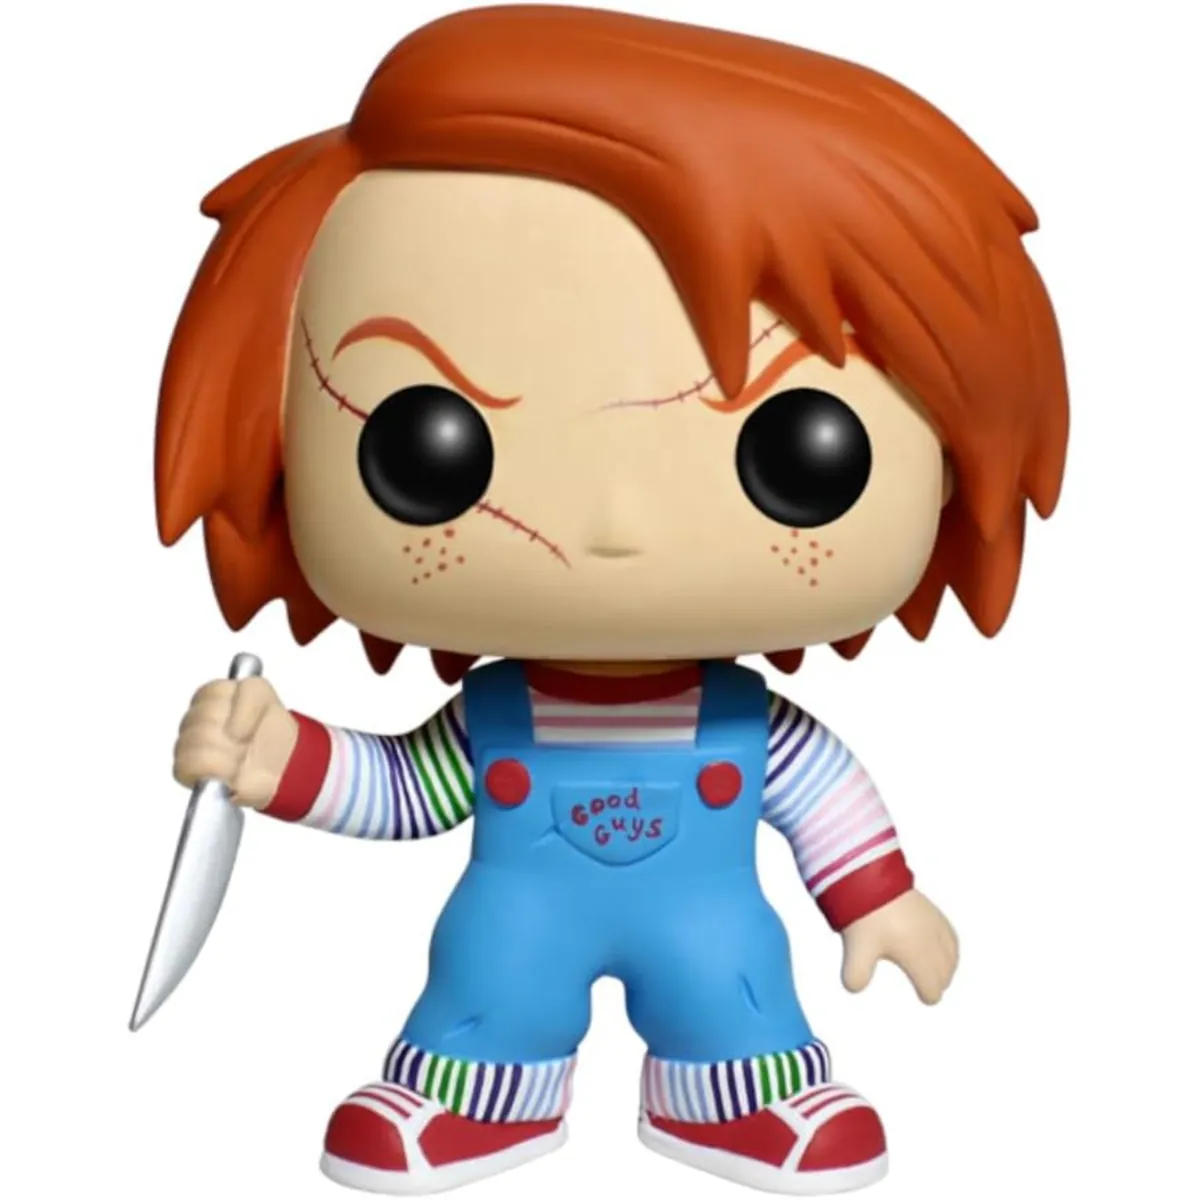 FK3362 Funko Pop! Movies - Child's Play 2 - Chucky Collectable Vinyl Figure